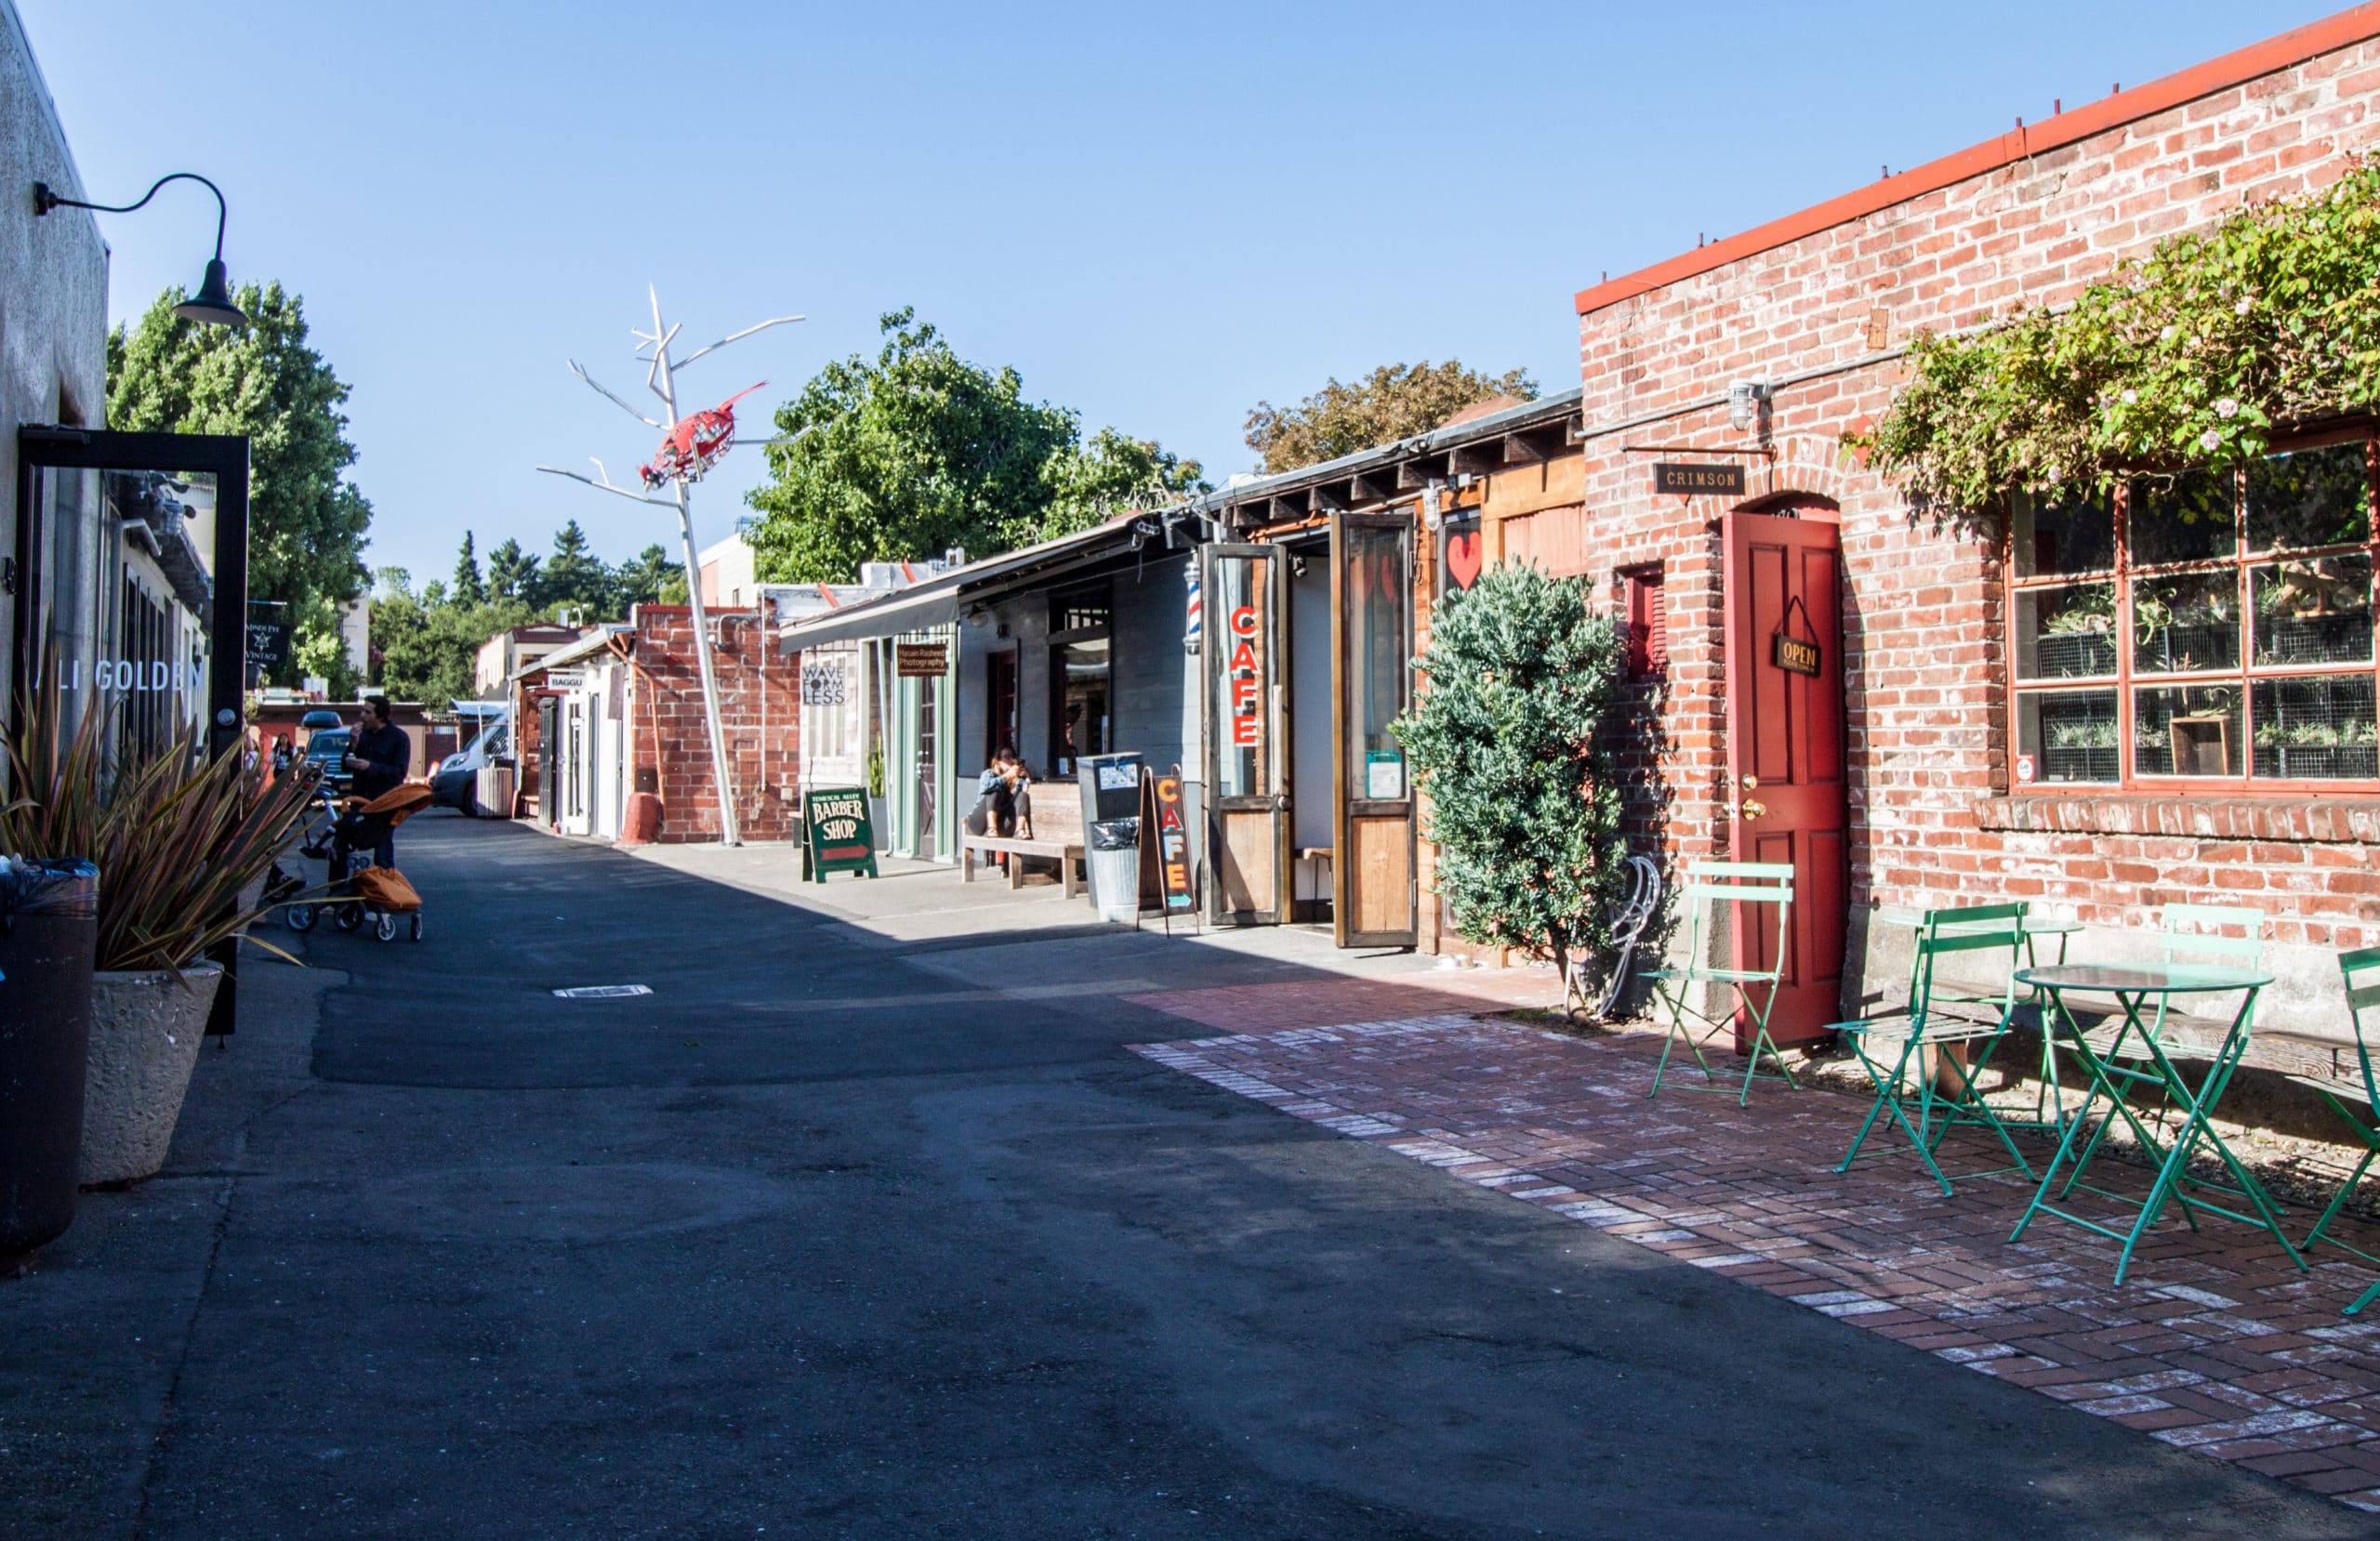 An image of the Temescal neighborhood, a popular residential area for prospective homebuyers and investors.